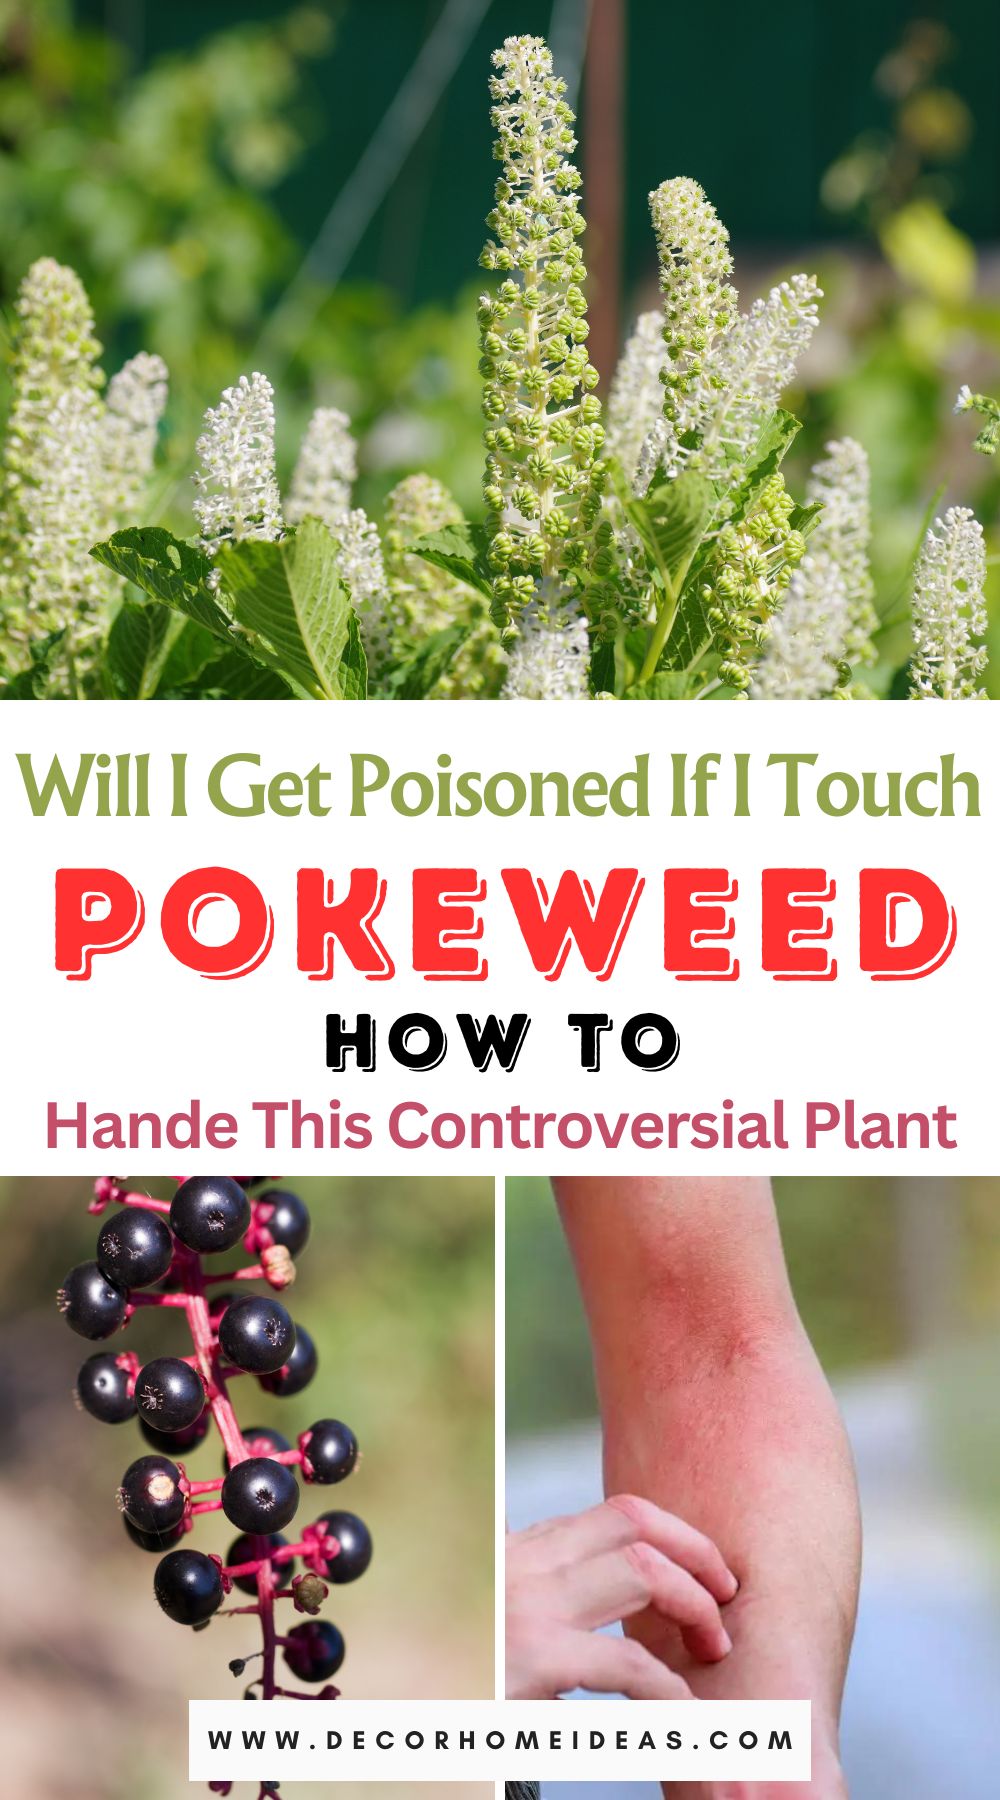 Uncover the truth about pokeweed's toxicity in our comprehensive exploration. Learn how to safely handle this controversial plant and dispel the myths surrounding its potential dangers.